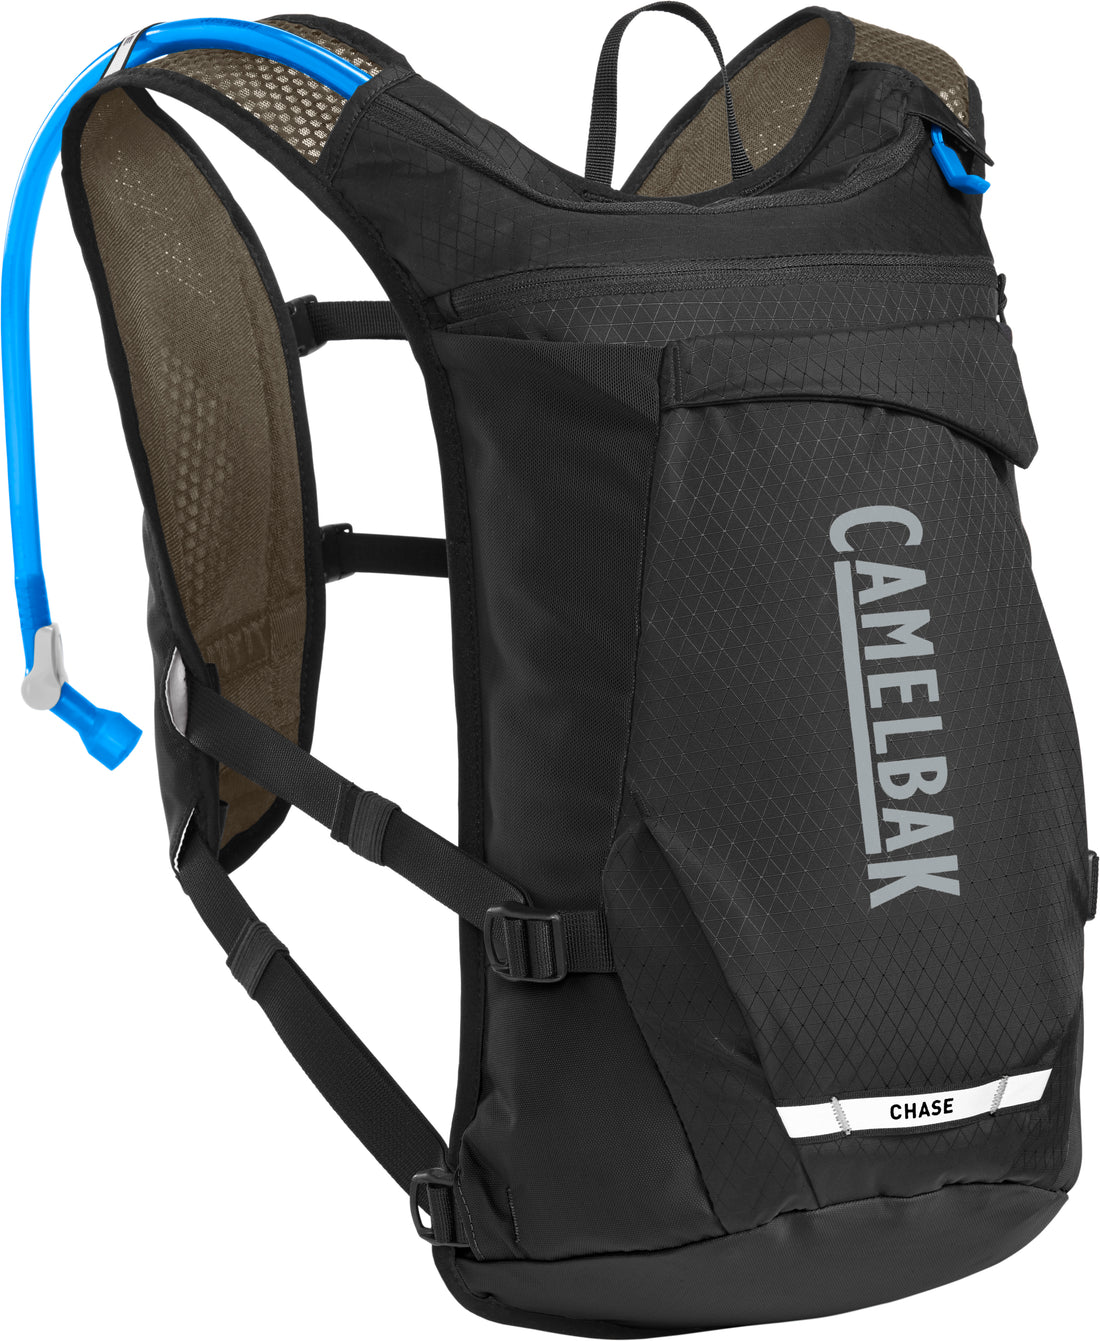 Camelbak|CHASE_ADVENTURE_8_VEST|Cycle_LM